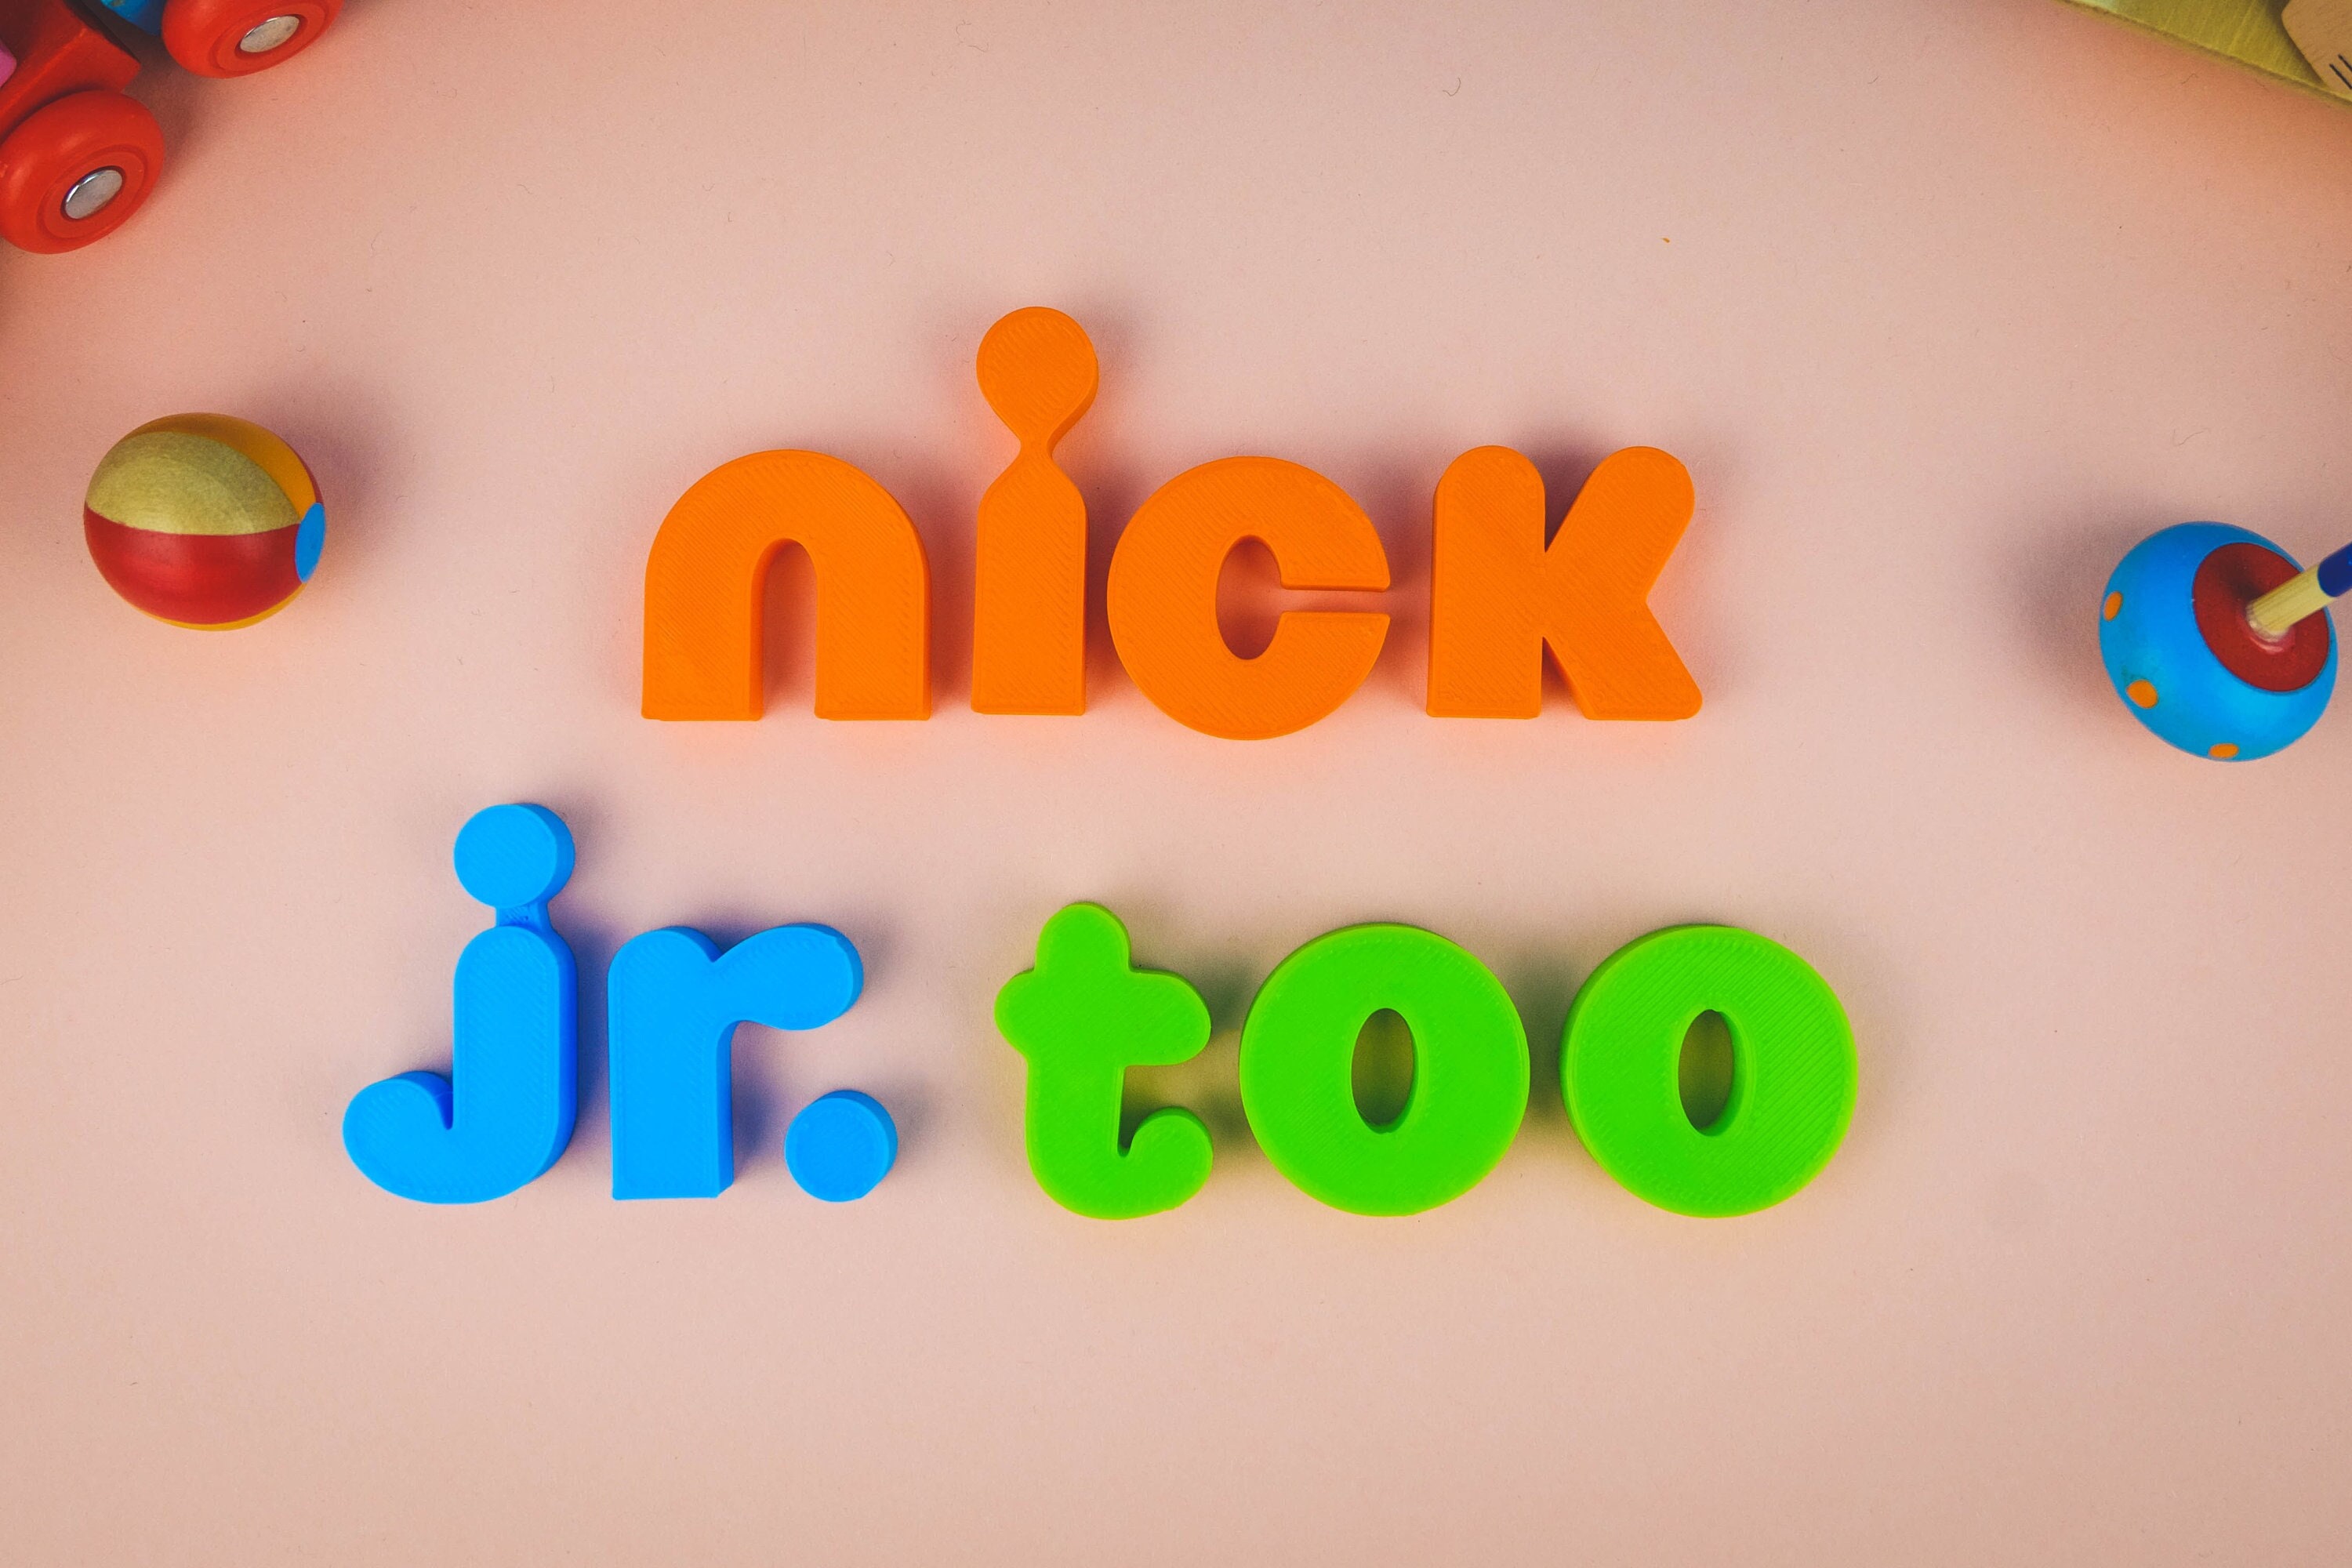 Nick Jr Too Letters 3D Printed Logo Pretend Play Kids Toy